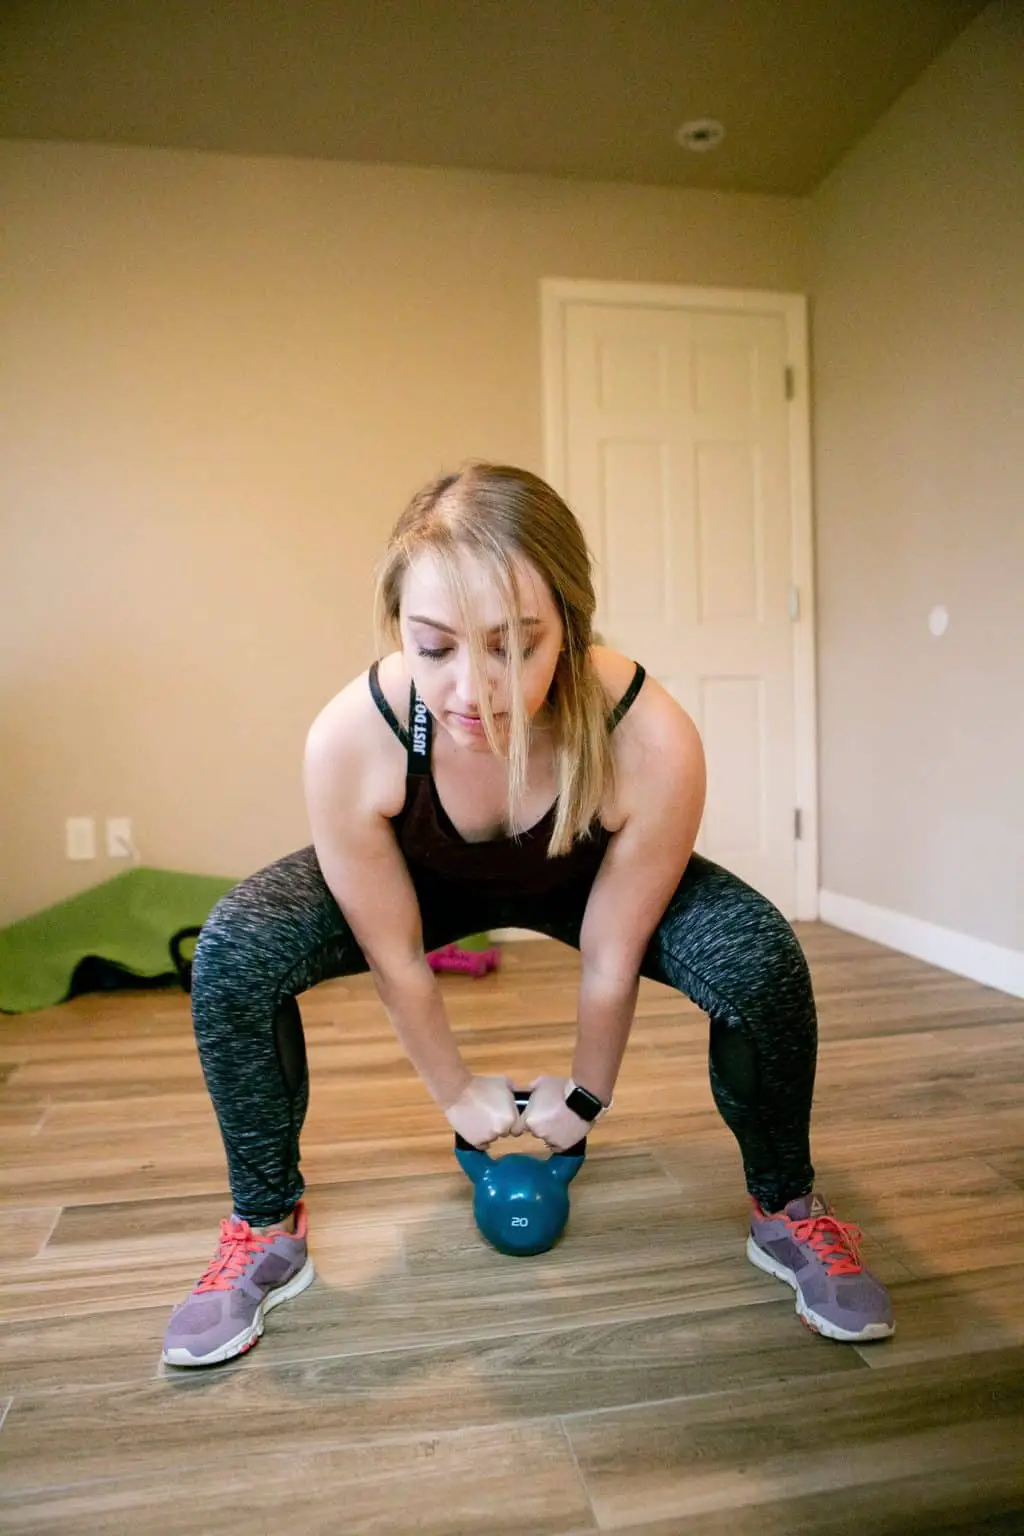 Woman gripping the kettlebell with both hands